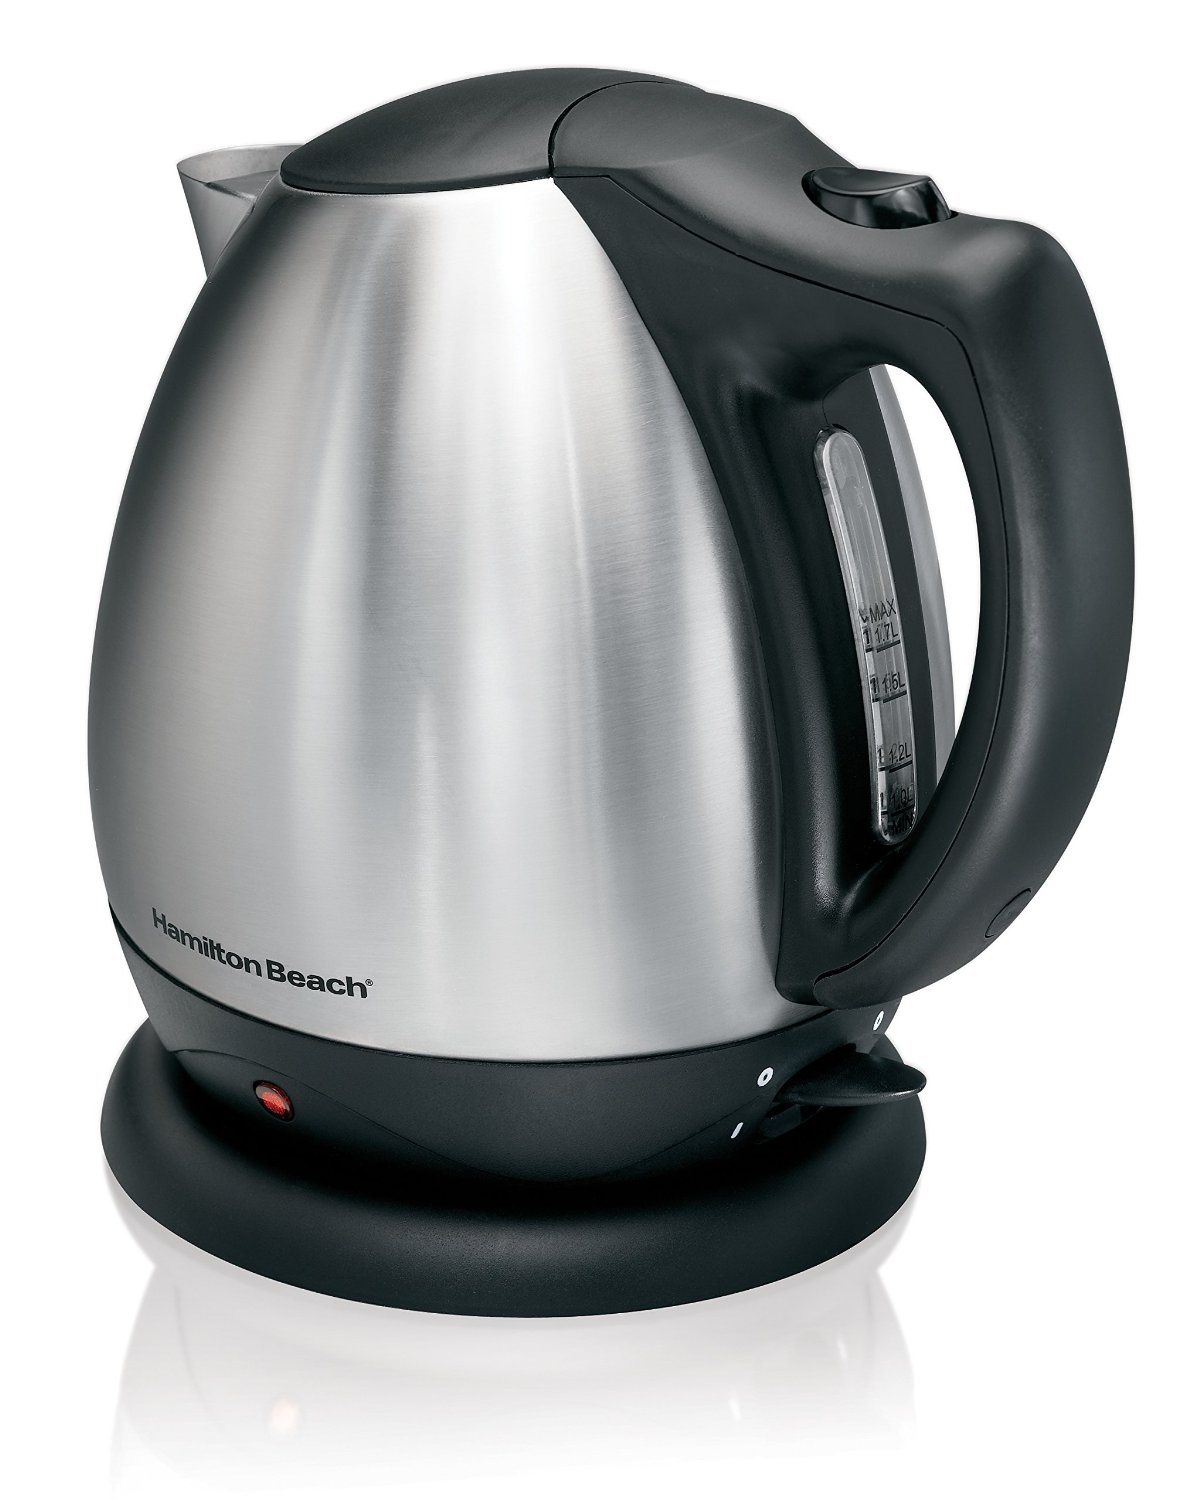 Hamilton Beach 40870 Stainless Steel 10-Cup Electric Kettle